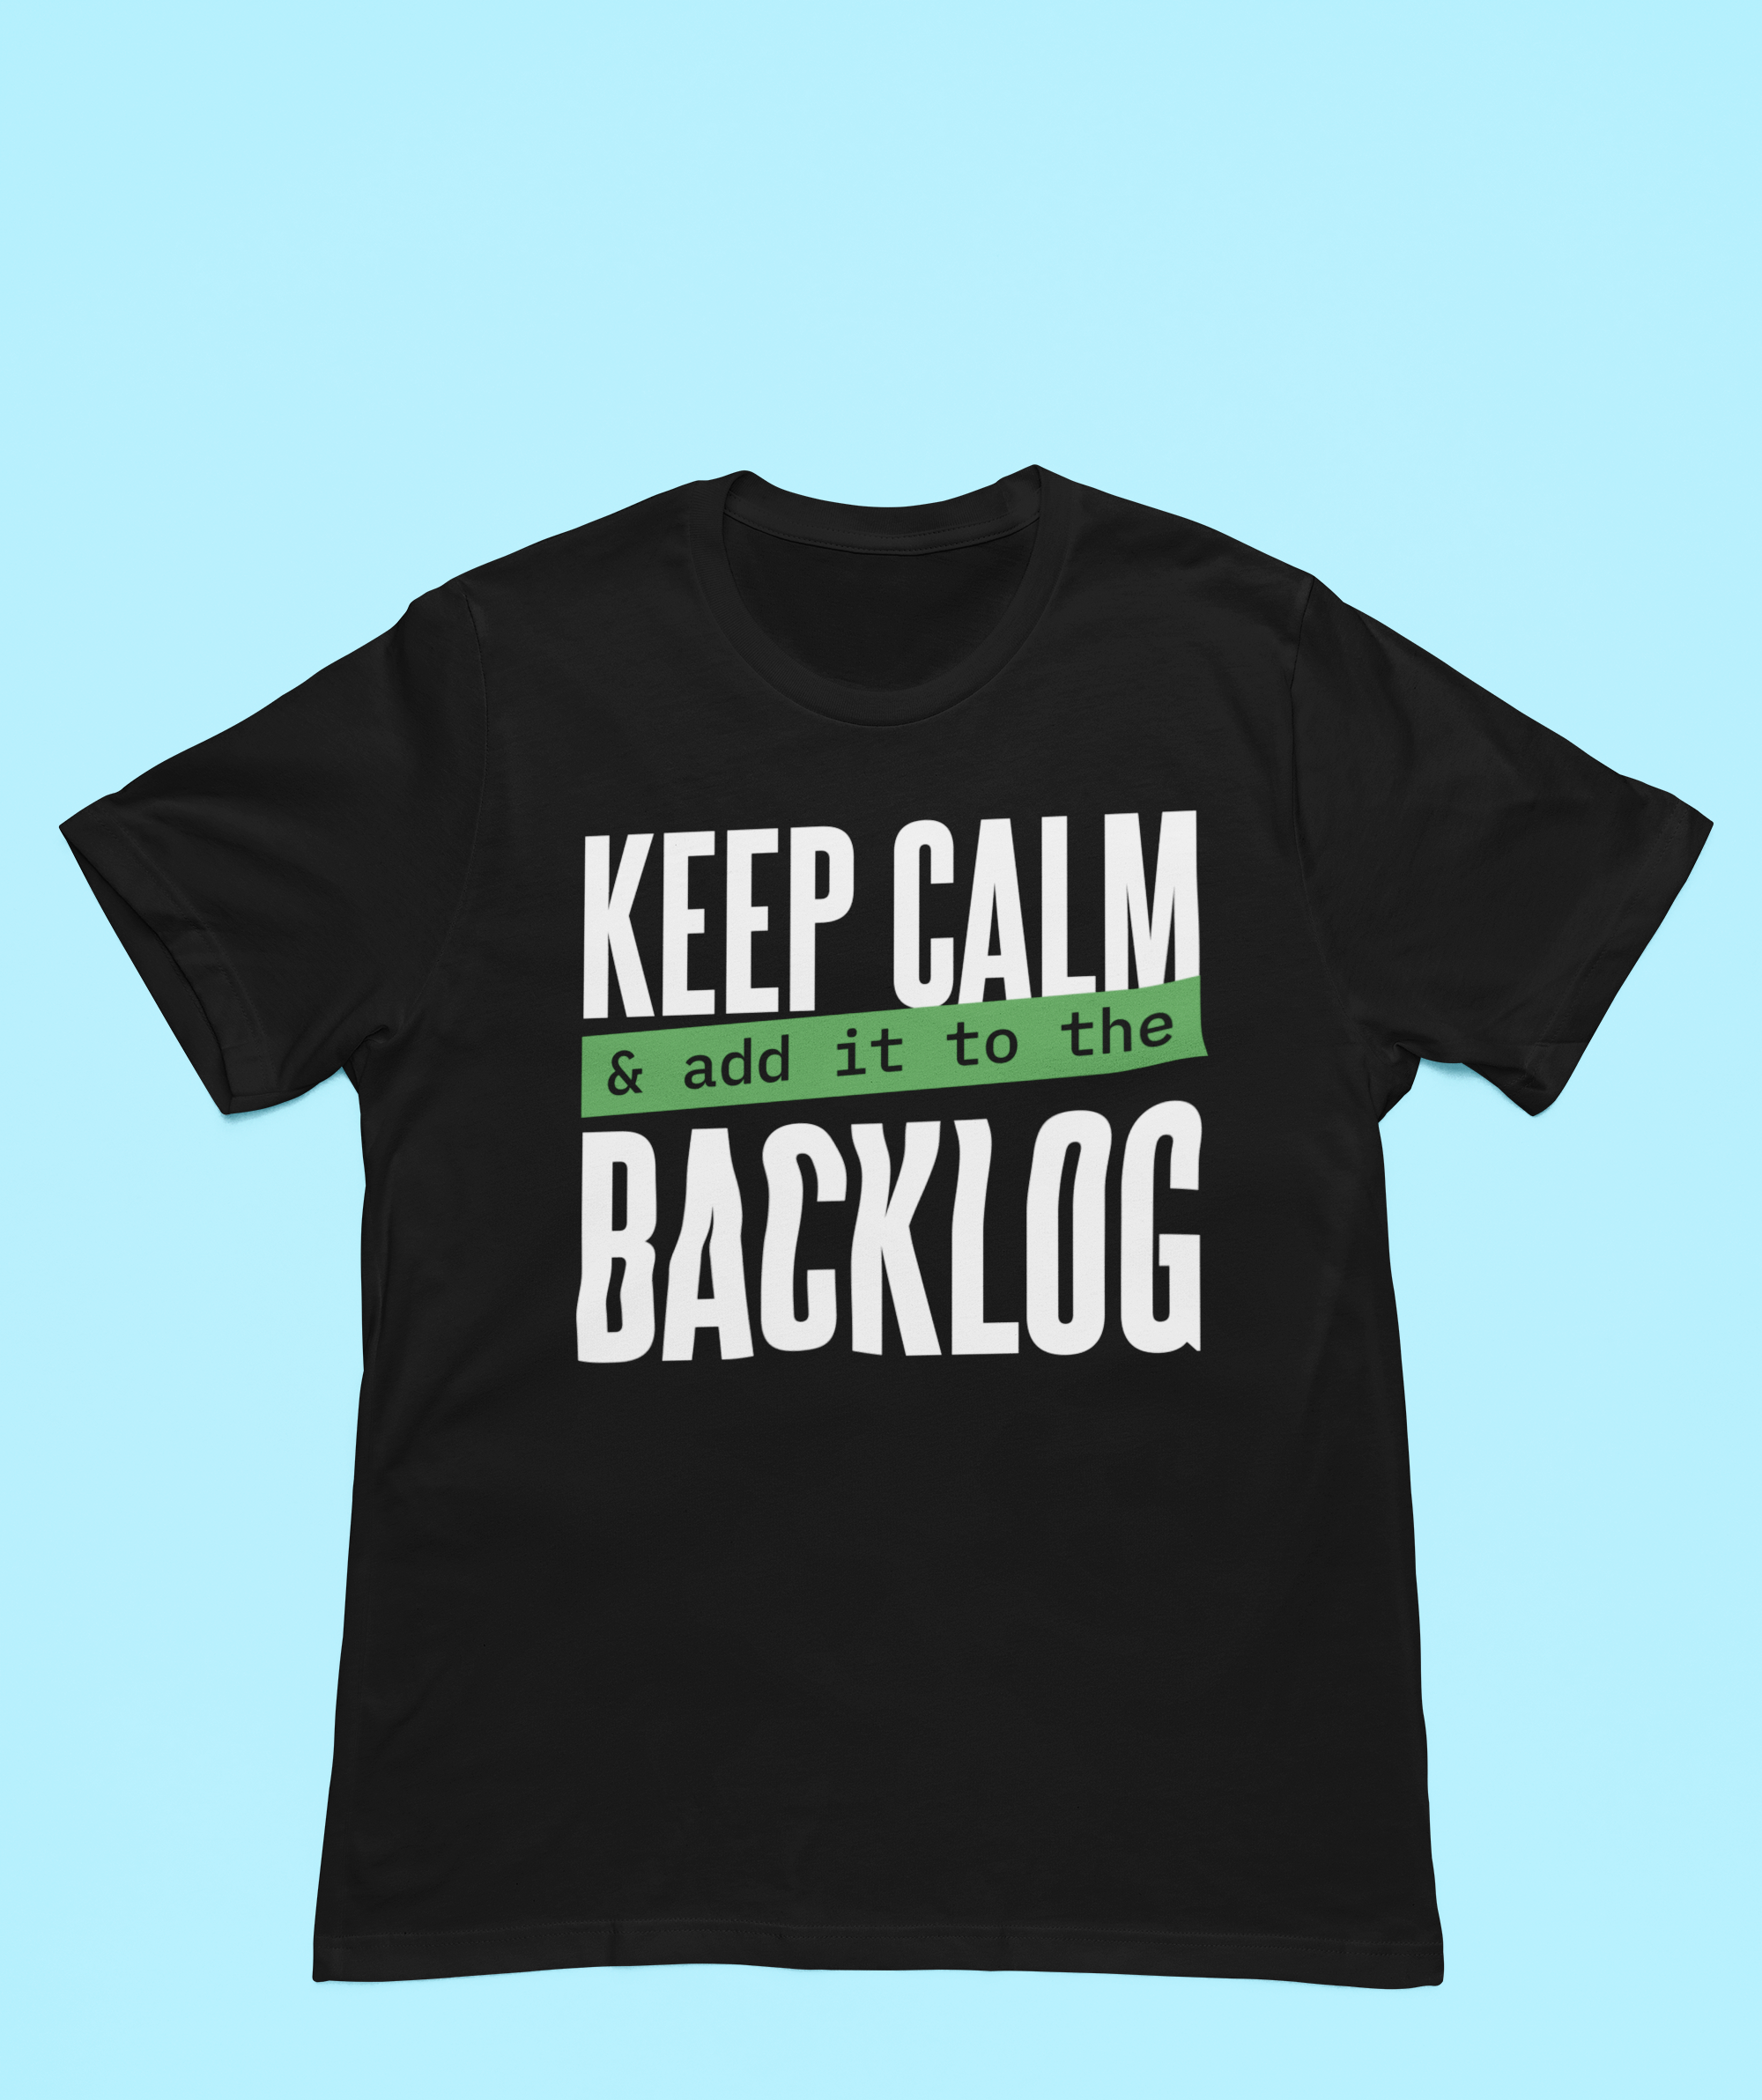 Keep Calm And add it to the backlog T-Shirt with "keep calm & chill, add it to the backlog" text in white and green.